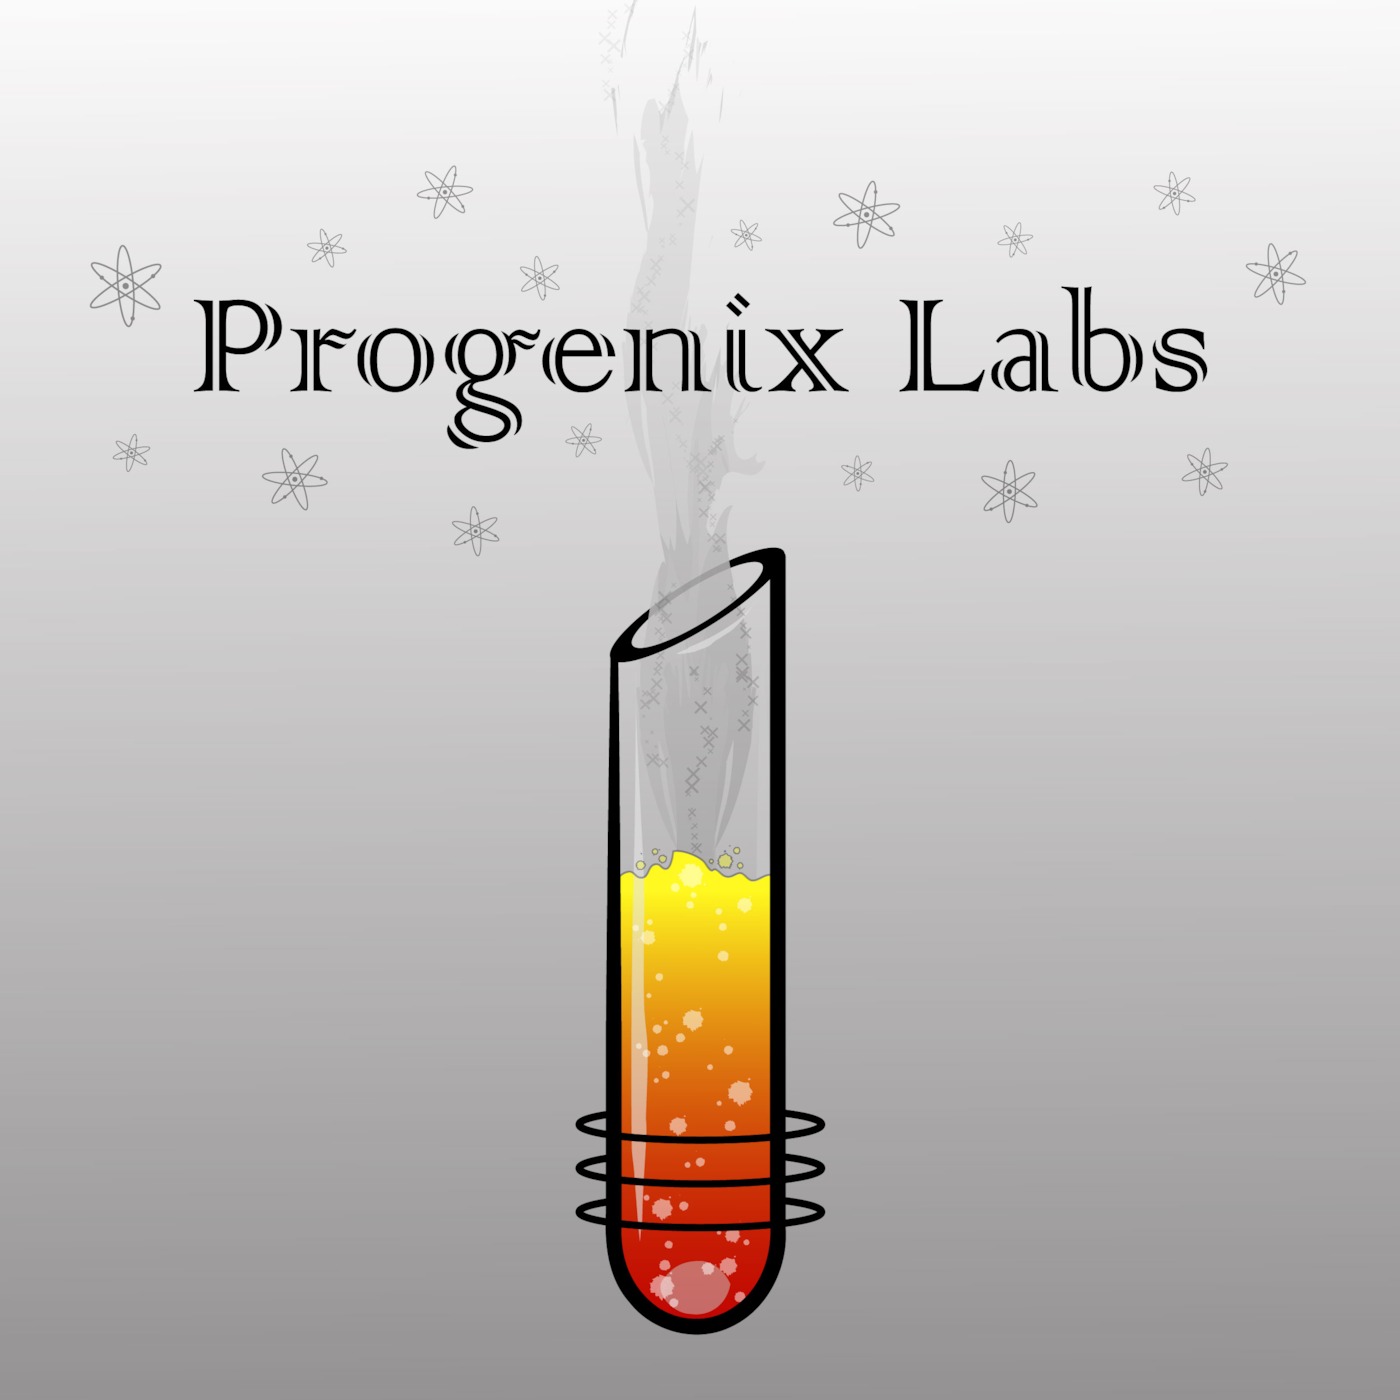 Progenix Labs - Episode 7:  The Cover Up